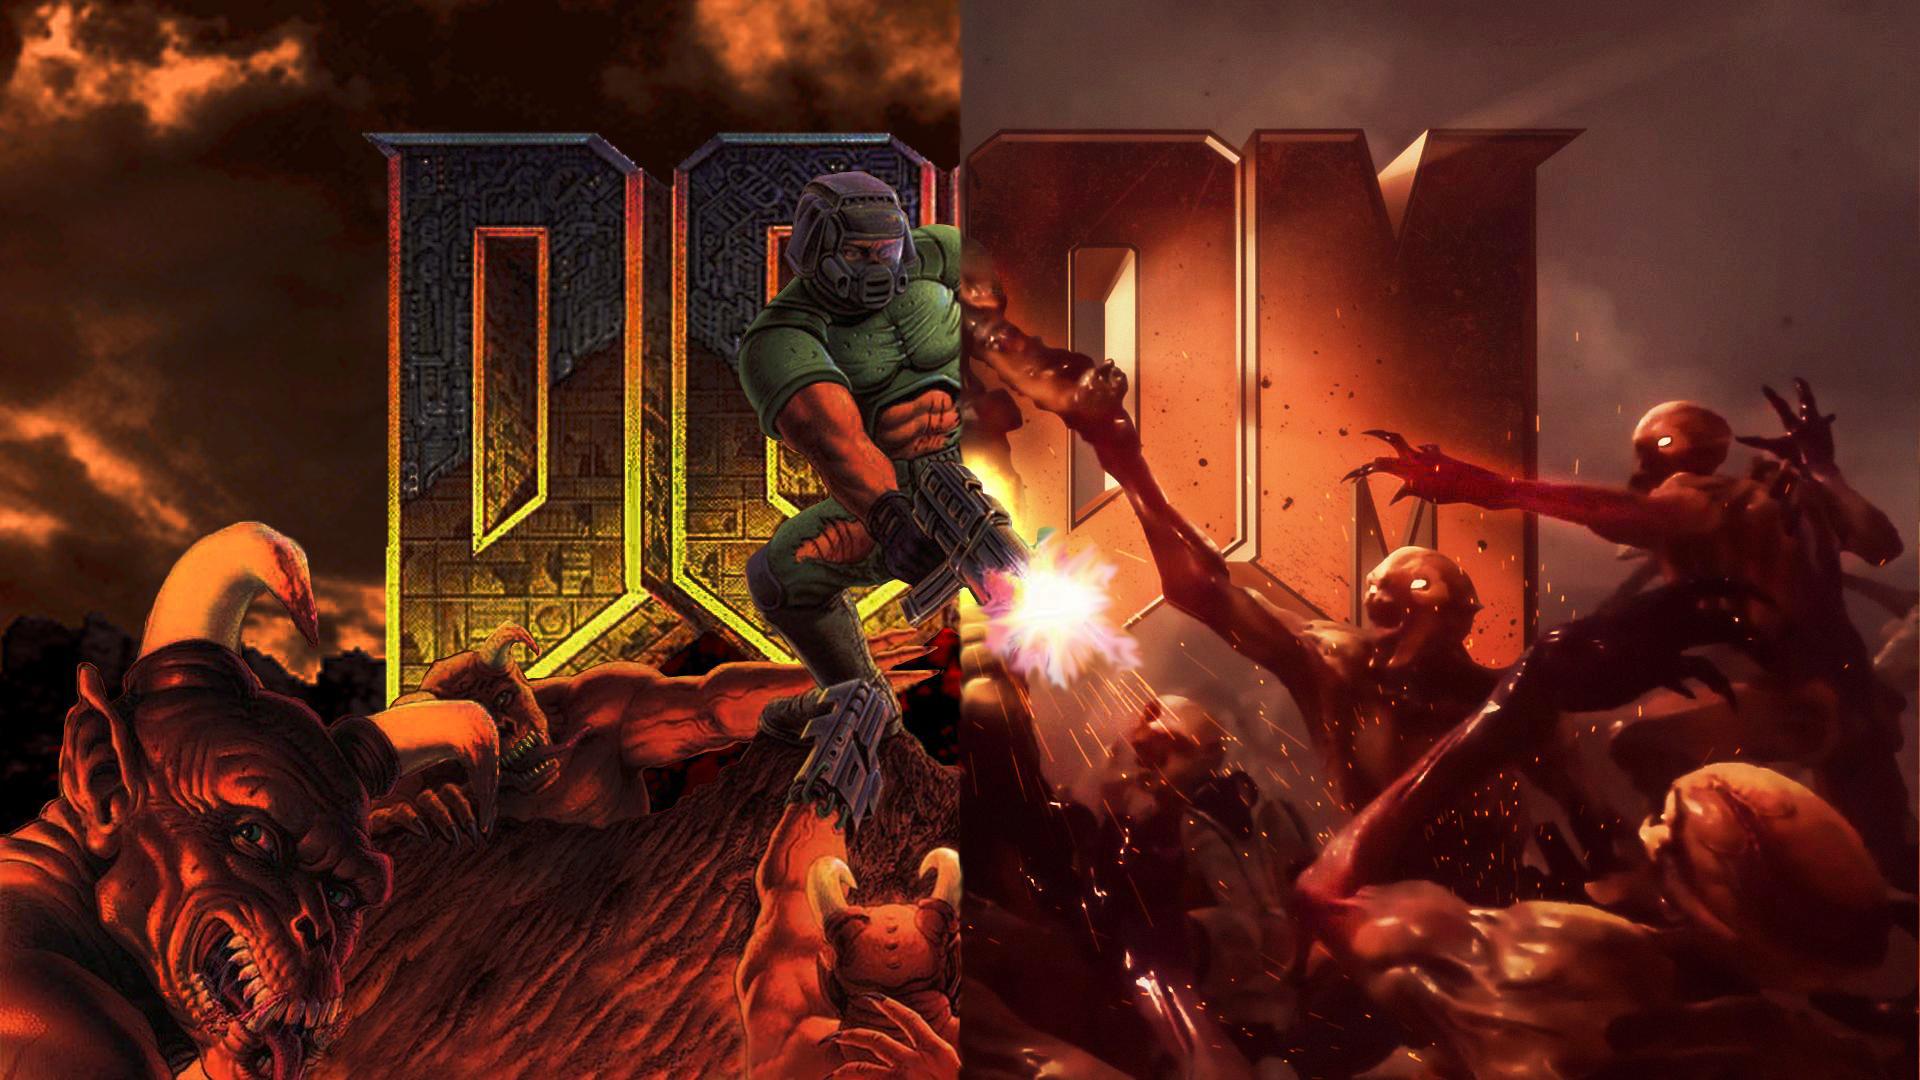 I Mixed The Classic Doom Wallpaper With The New One - Doom Eternal Wallpaper 4k , HD Wallpaper & Backgrounds